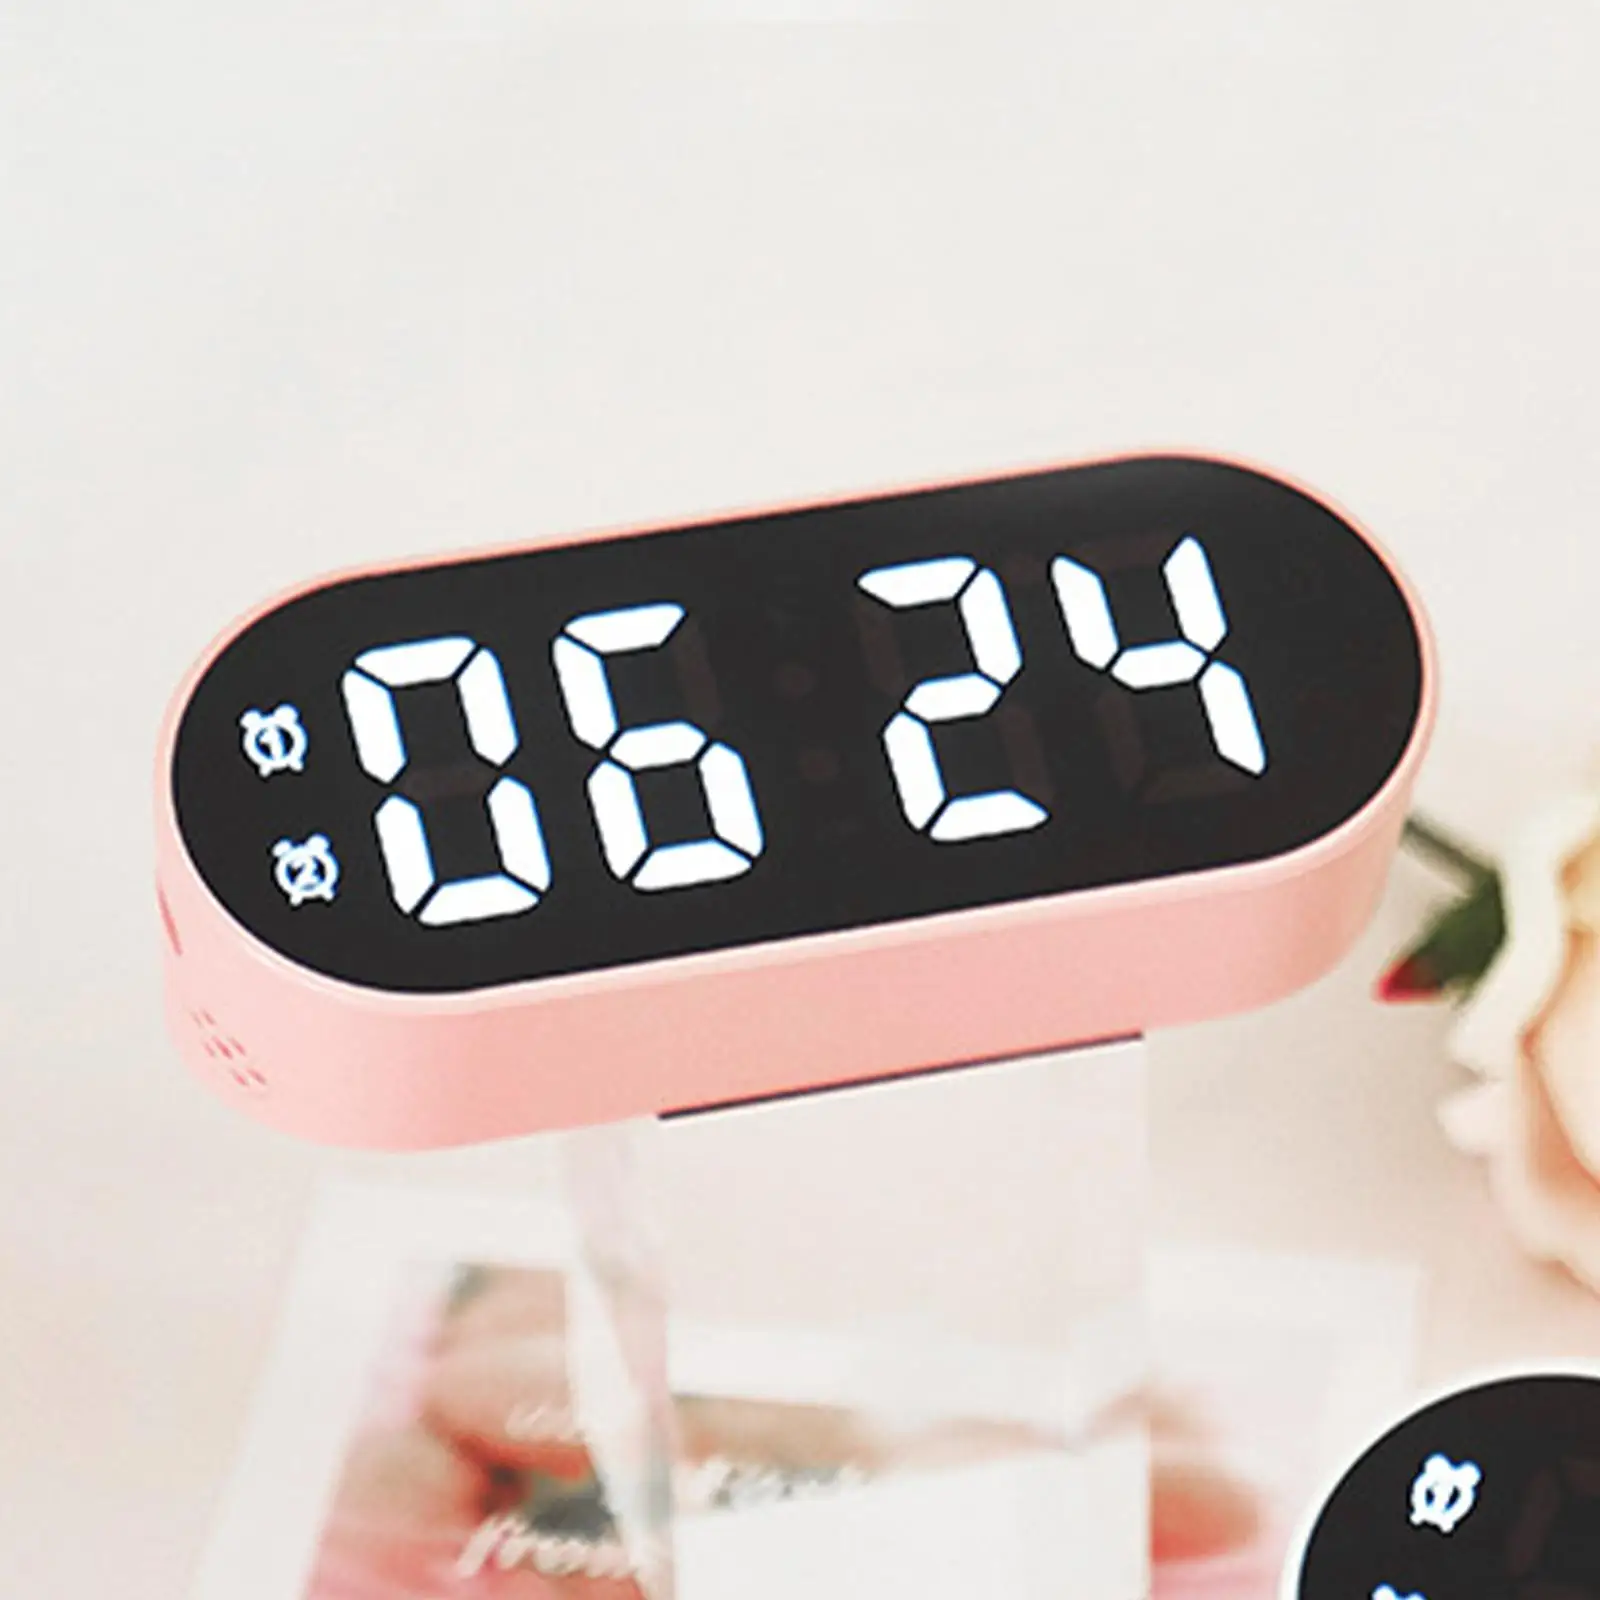 Digital Clock with Snooze Electronic Clock Rechargeable for Travel